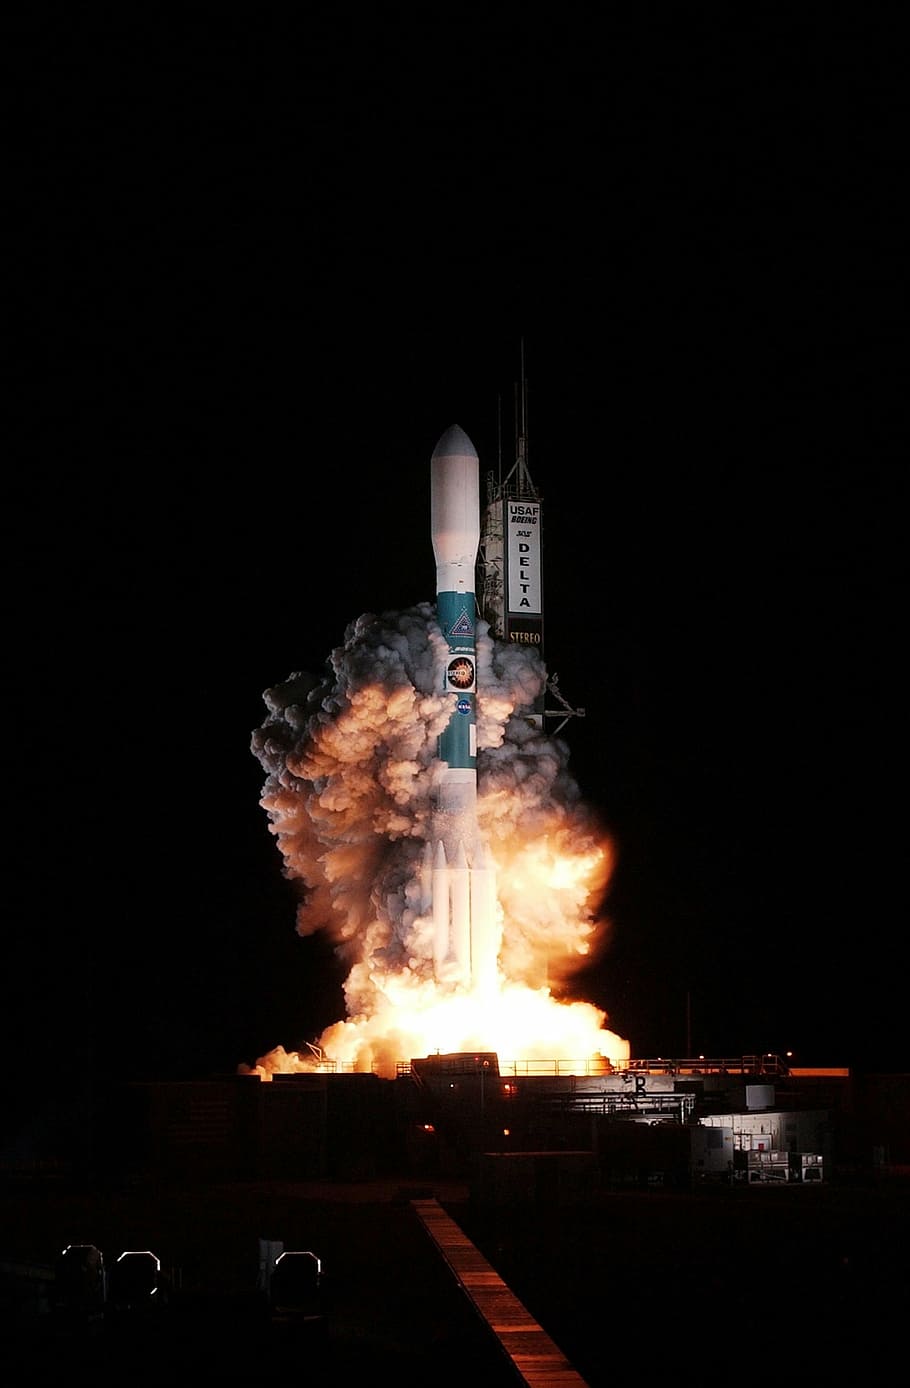 white space shuttle launching during night time, spacecraft, liftoff